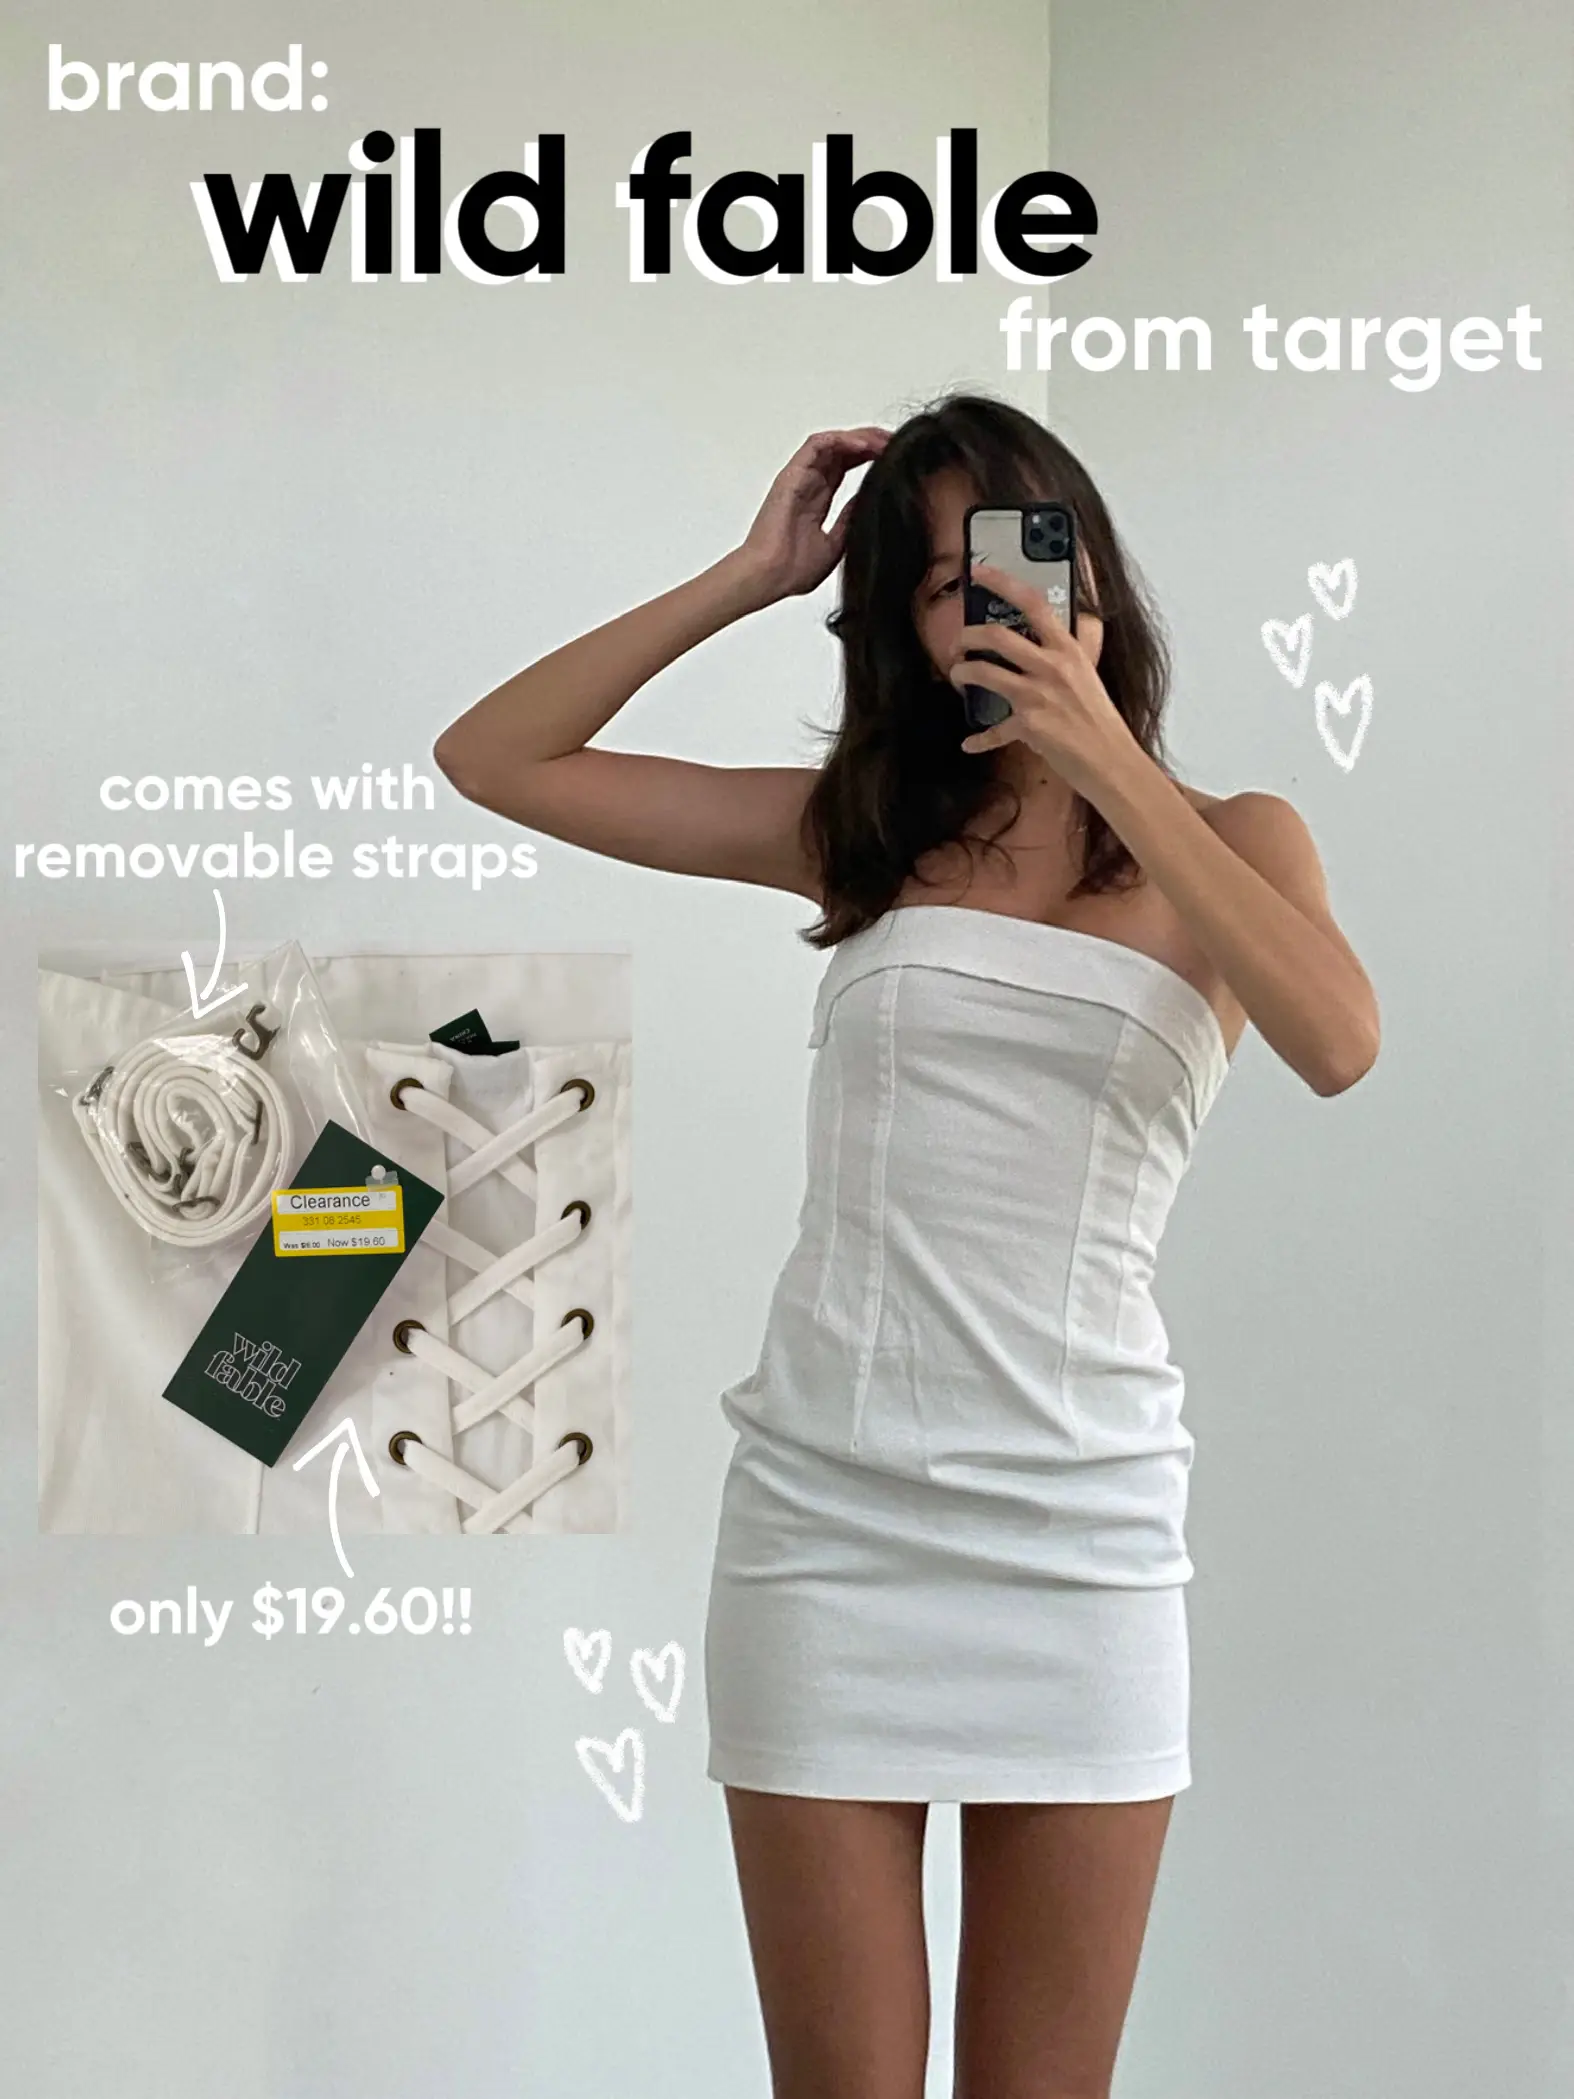 🎯 SO MANY NEW FINDS‼️TARGET WOMEN'S CLOTHING